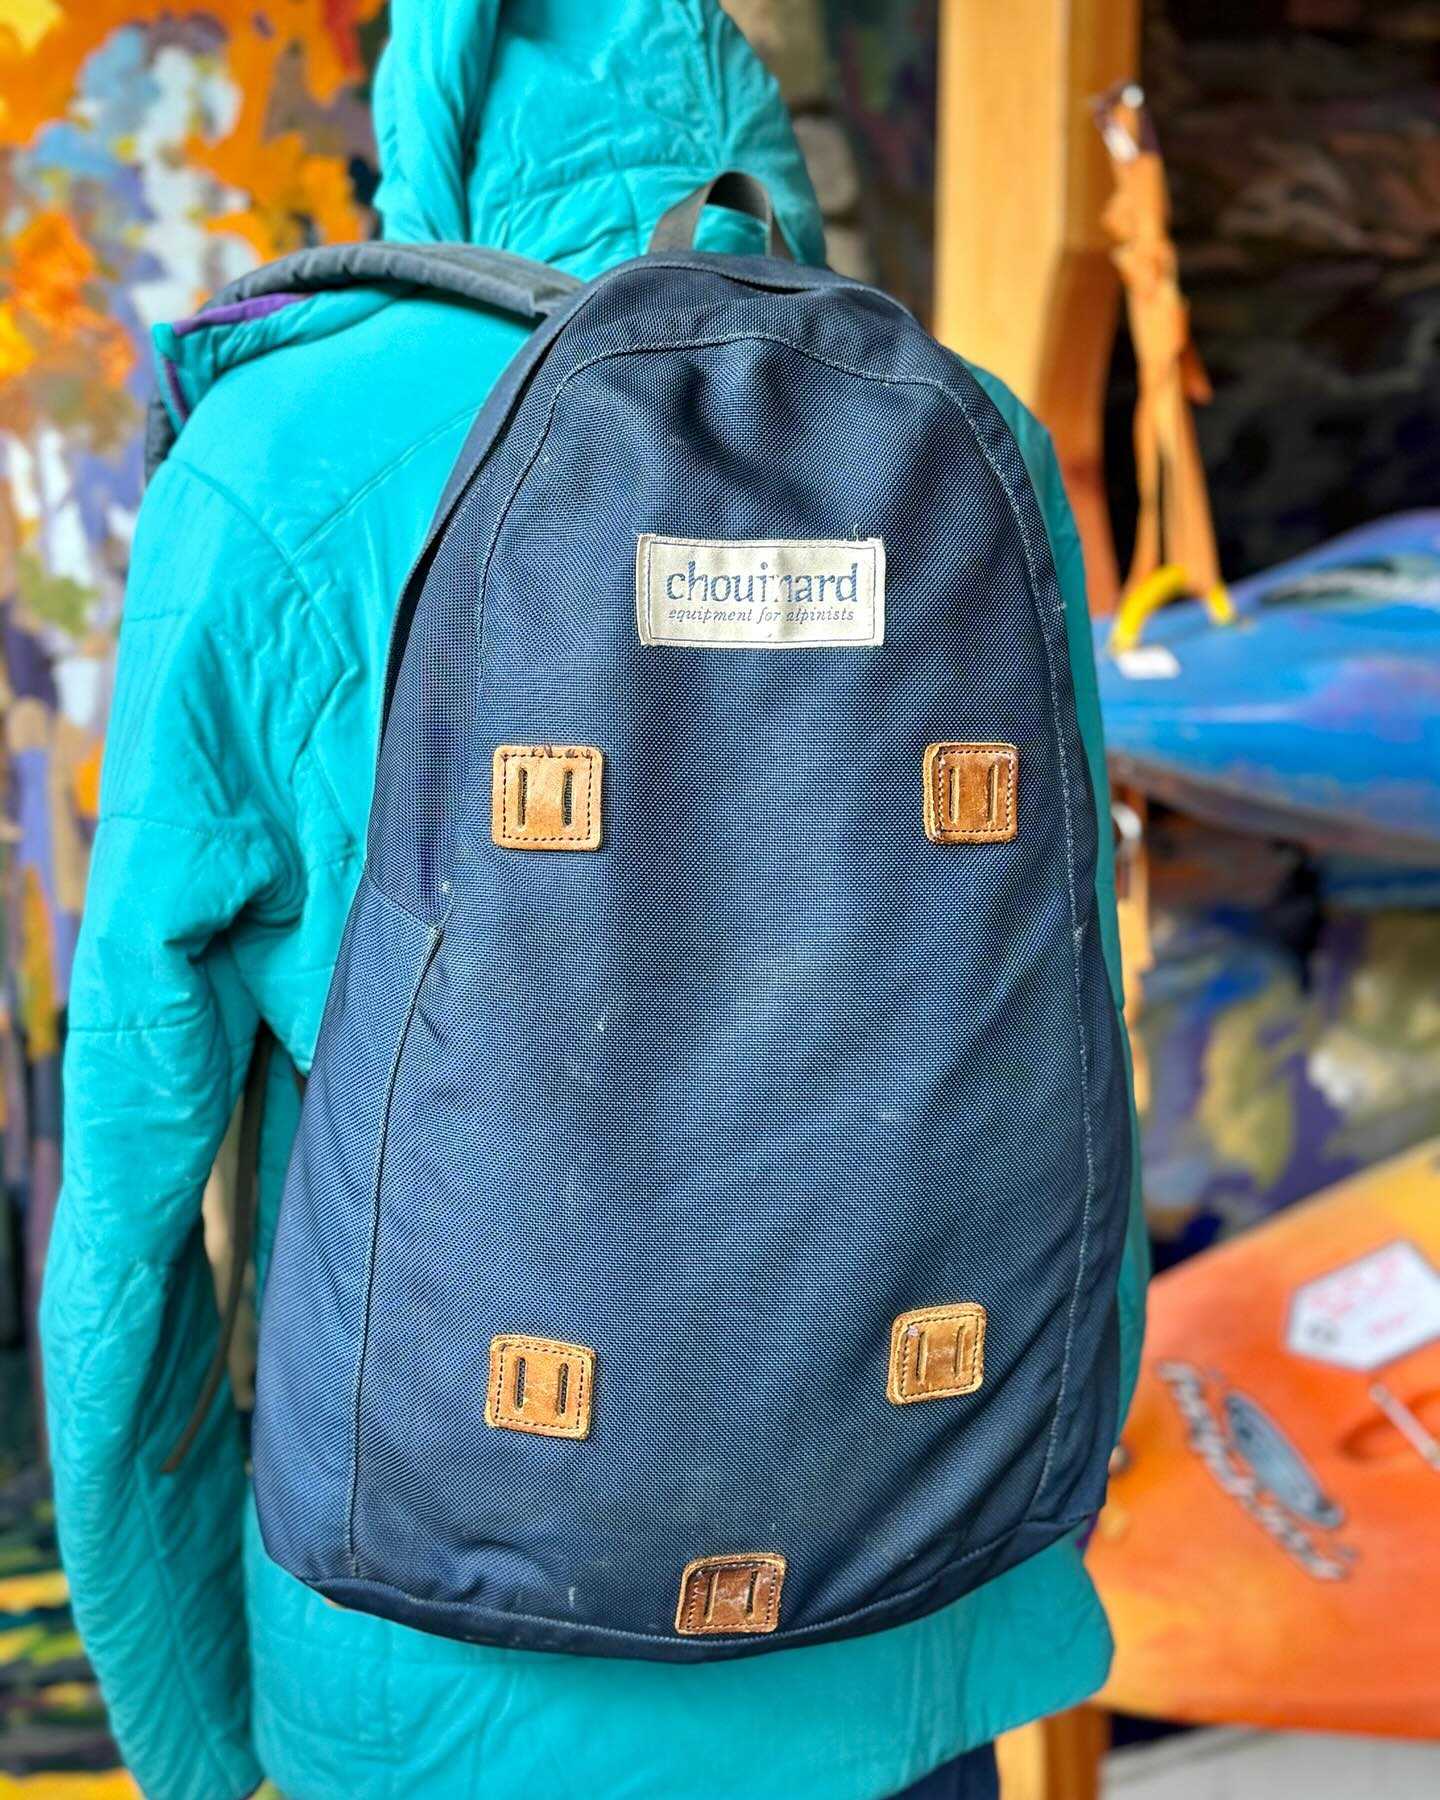 Some call it retro, we call it historical. 

This pack came in and we are not sure if we should put it in a museum or put it back out into the world. I’m going to take a stab that Yvonne Chouinard would say, put it back outside… on the trail!

For those uninitiated into nerdy outdoor brand trivia, Chouinard Equipment was the precursor to @patagonia and Black Diamond Equipment. Yvonne would start Chouinard in 1957 and would become corporately known as Great Pacific Iron Works Inc in 1973 and included the brand, Patagonia.

This pack, known as the Creag Dubh (Gaelic for “Black Crag”) has a capacity of 1600 cubic inches, which is about 26 liters. A very common size for a day pack even in 2024! It’s made from 15 oz ballistic nylon and has a heavy duty zipper that puts the tiny lightweight zippers on high tech gear to absolute shame. This pack has been in circulation since the late 70’s, according to the consigner. (This author says, “The mid to late 70’s was a great time to be introduced to the world”. )

We did one small repair where the zipper anchor point was reinforced, meaning it has another 40 years of life, minimum, ahead. See picture for a close up. 

We are offering this piece of still functional history at a market value of $325.00. We don’t normally ship here at DGE but for this gem, we will consider domestic shipping. 

Stop in for a look or shoot us a message if you’re interested in owning this awesome piece of equipment.
-
#vintagegear #chouinard #chouinardequipment #outdoorconsignment #legacygear #patagonia #pacificironworks #yvonnechouinard